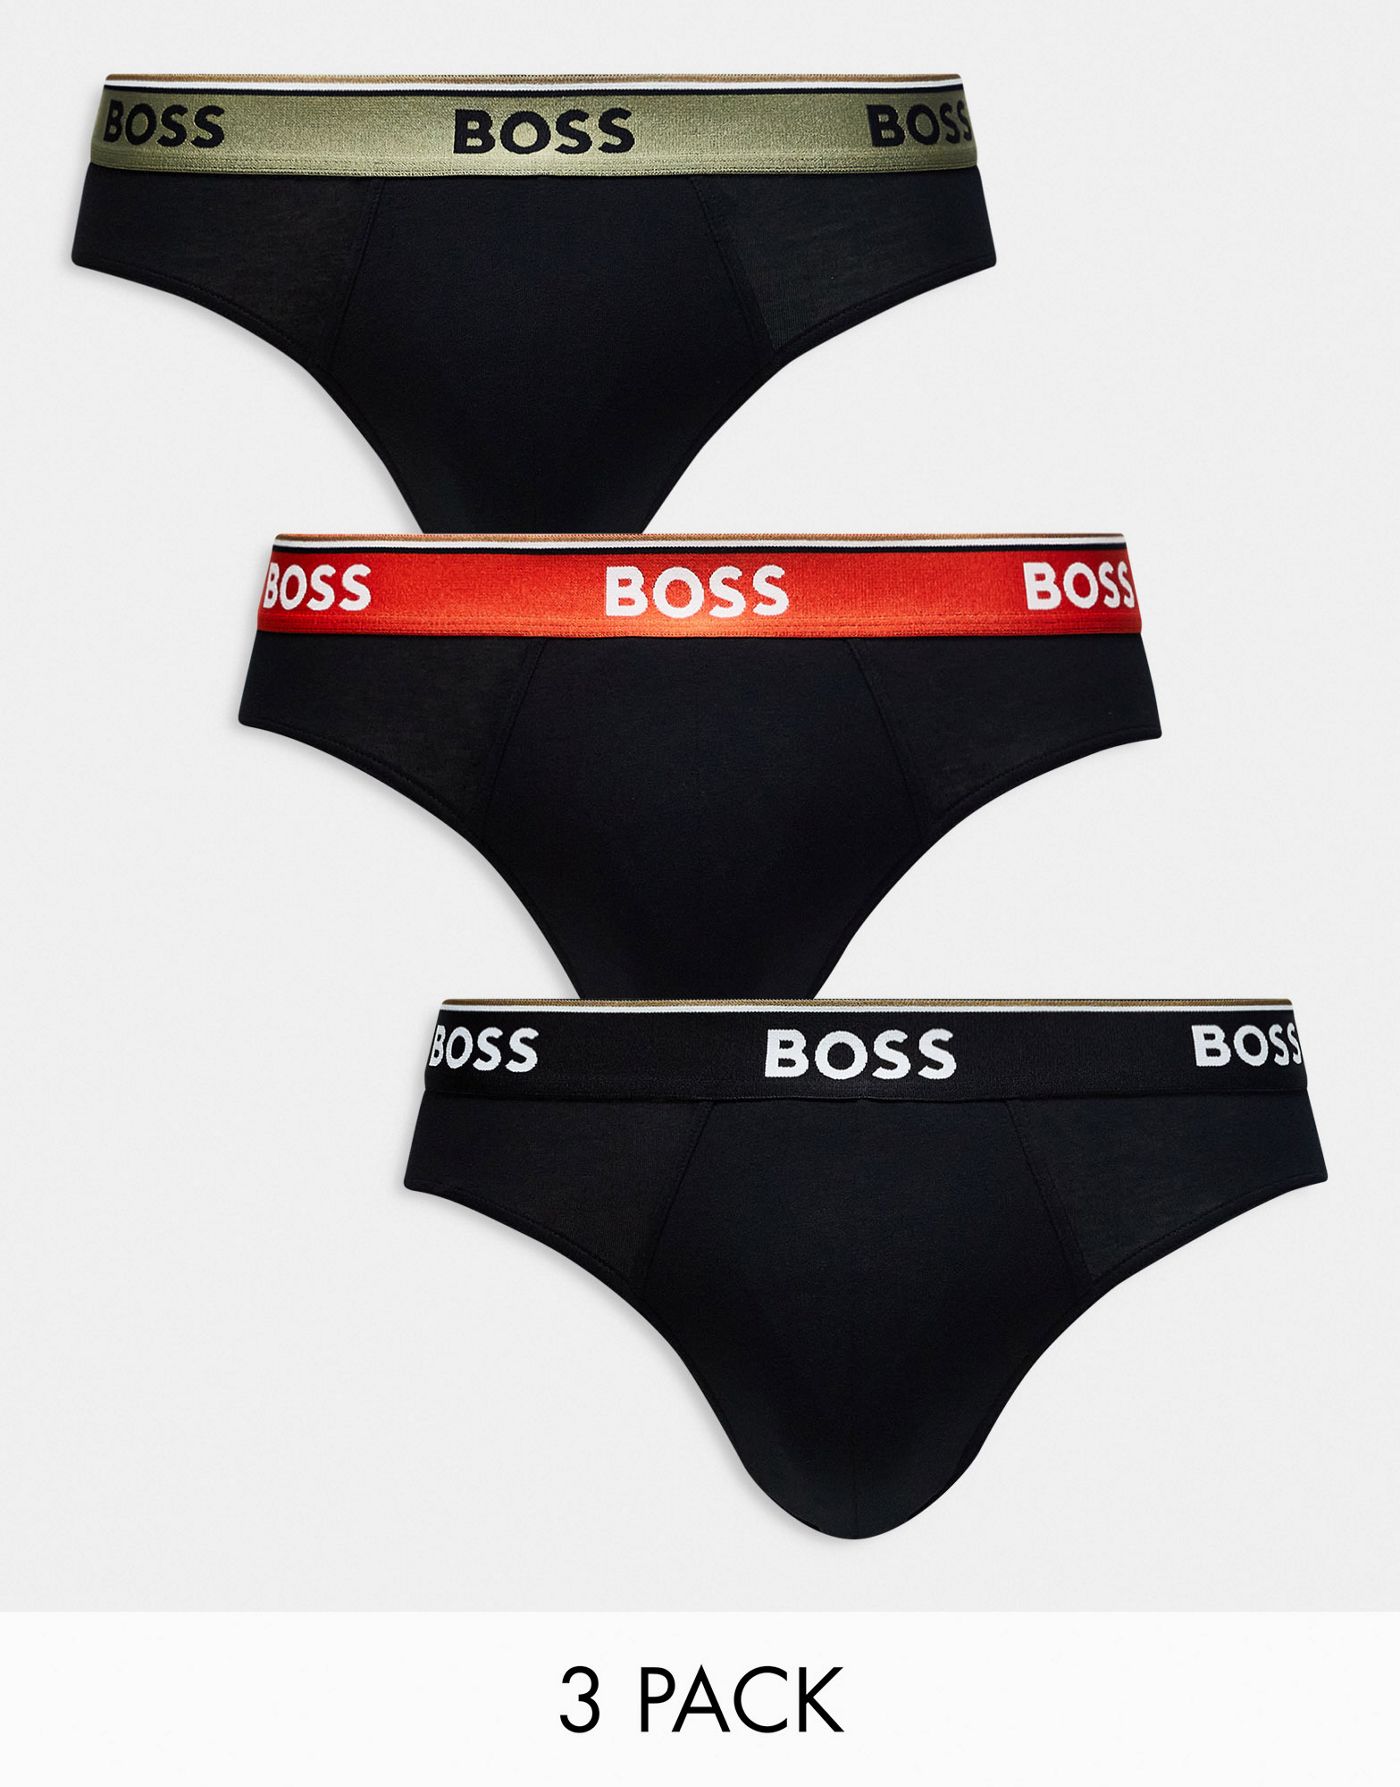 Boss Bodywear bold 3 pack briefs with contrast waistbands in black